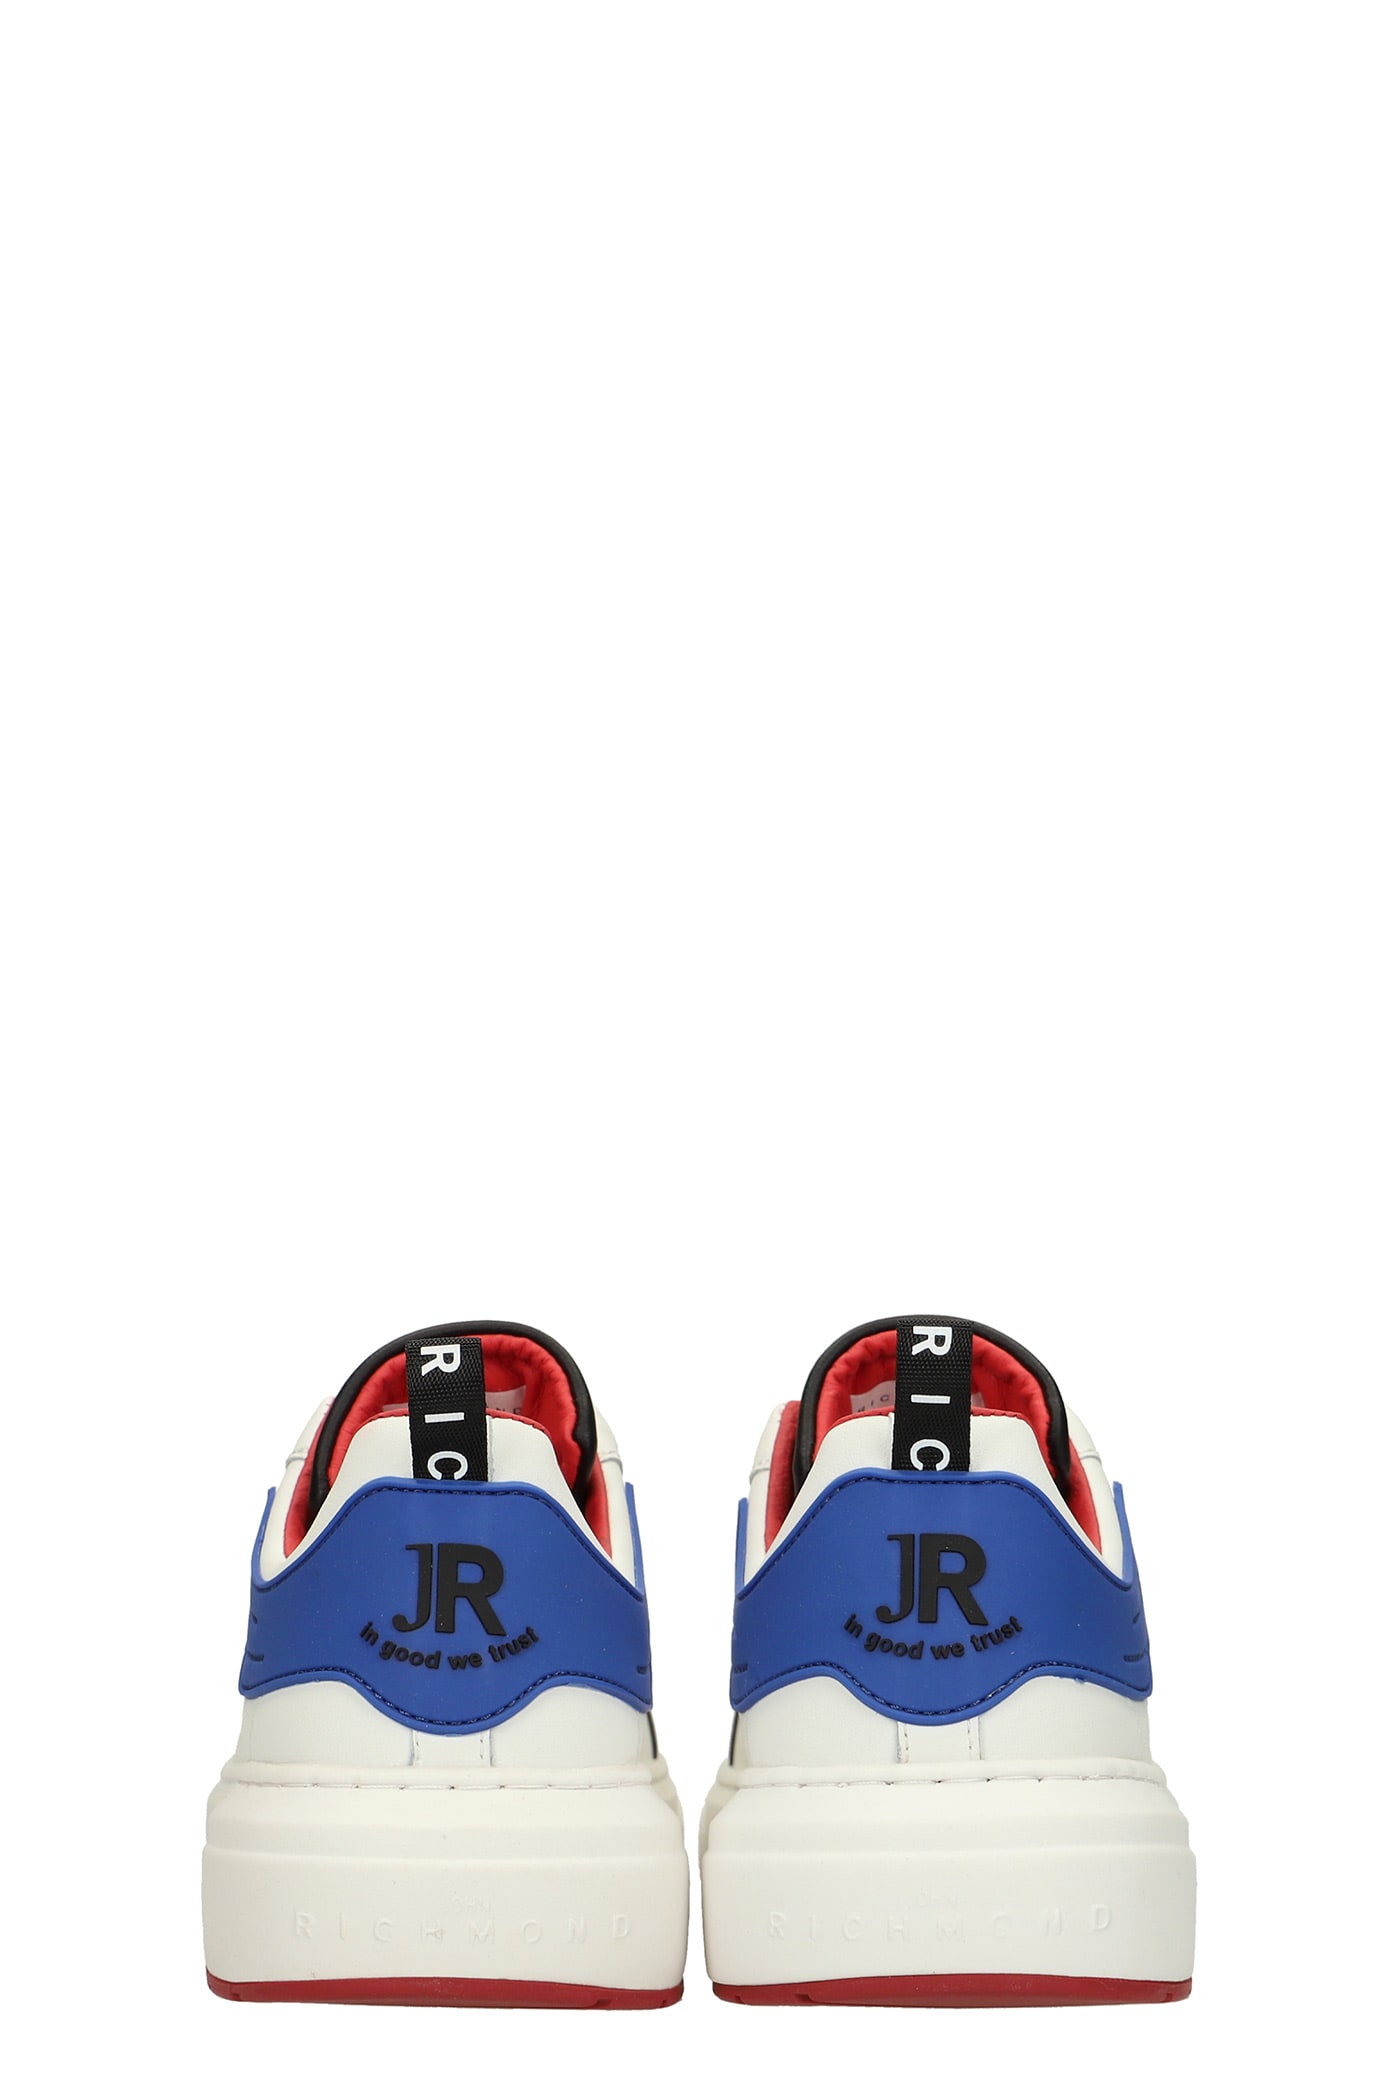 John Richmond Sneakers Patch Wings On The Heel Jarch Jrch Internal And ...